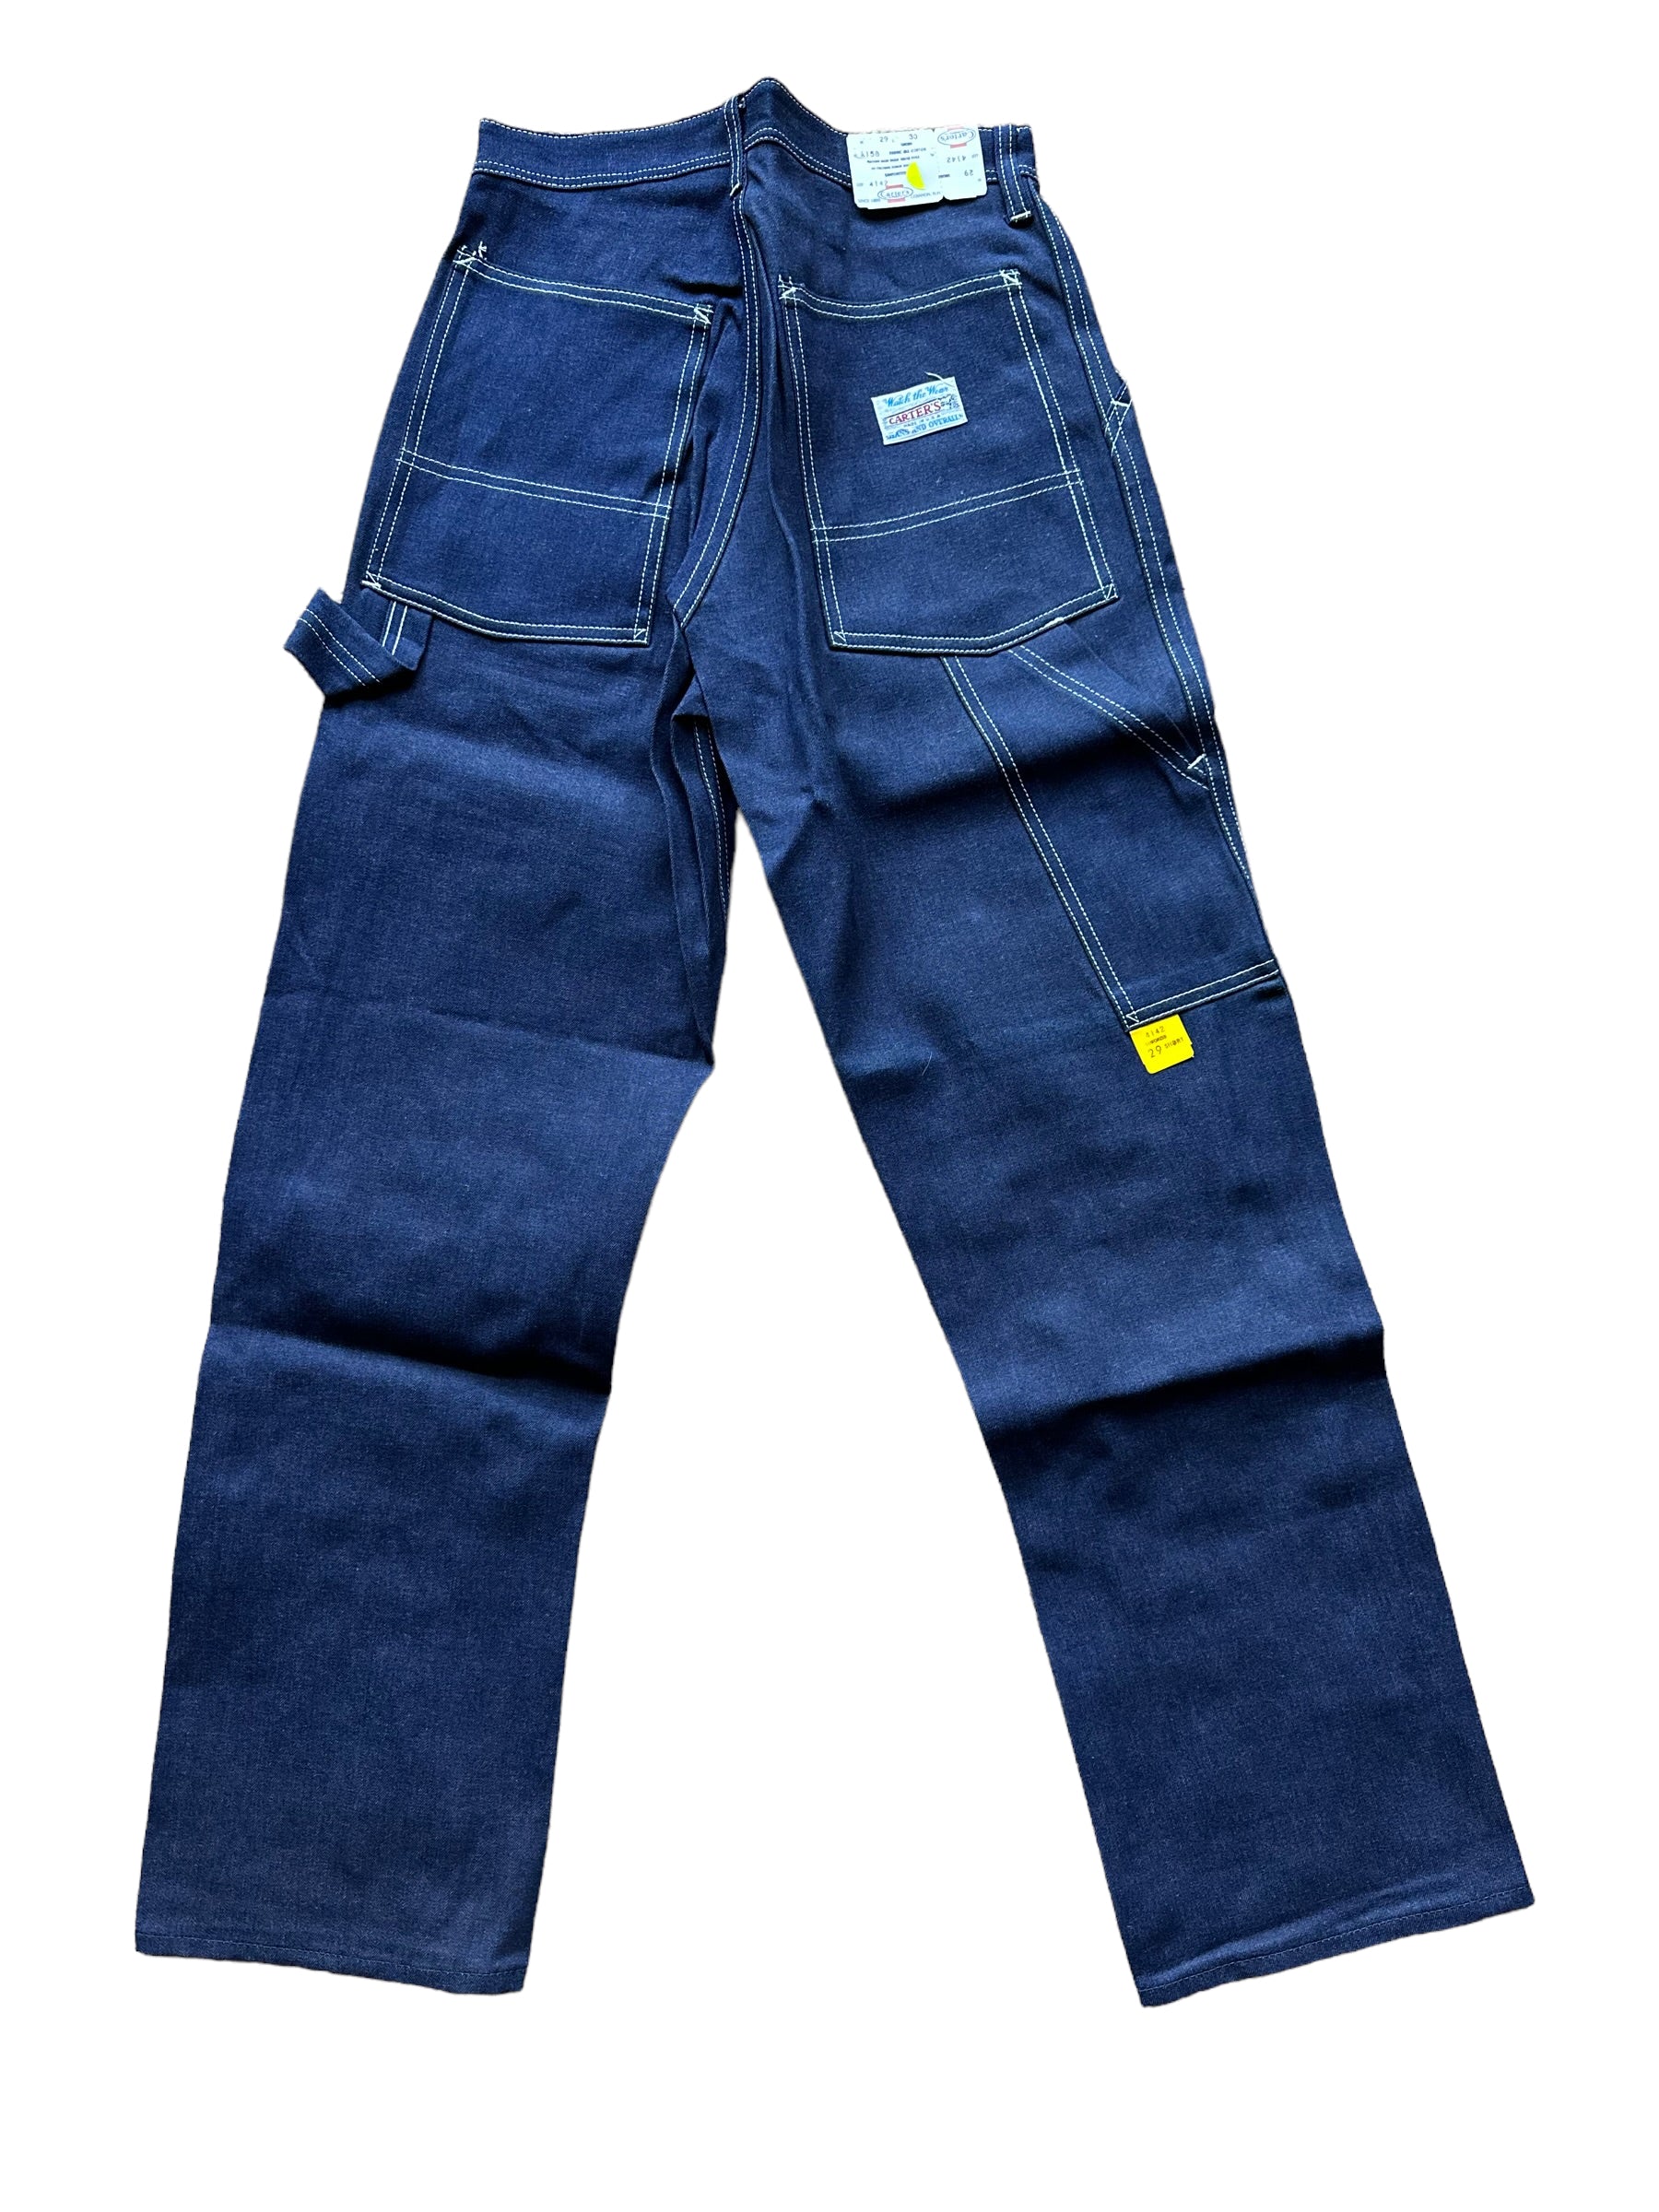 Rear View of New Old Stock Vintage Carter's Carpenter Dungarees W29 L30 | Vintage Denim Workwear Seattle 